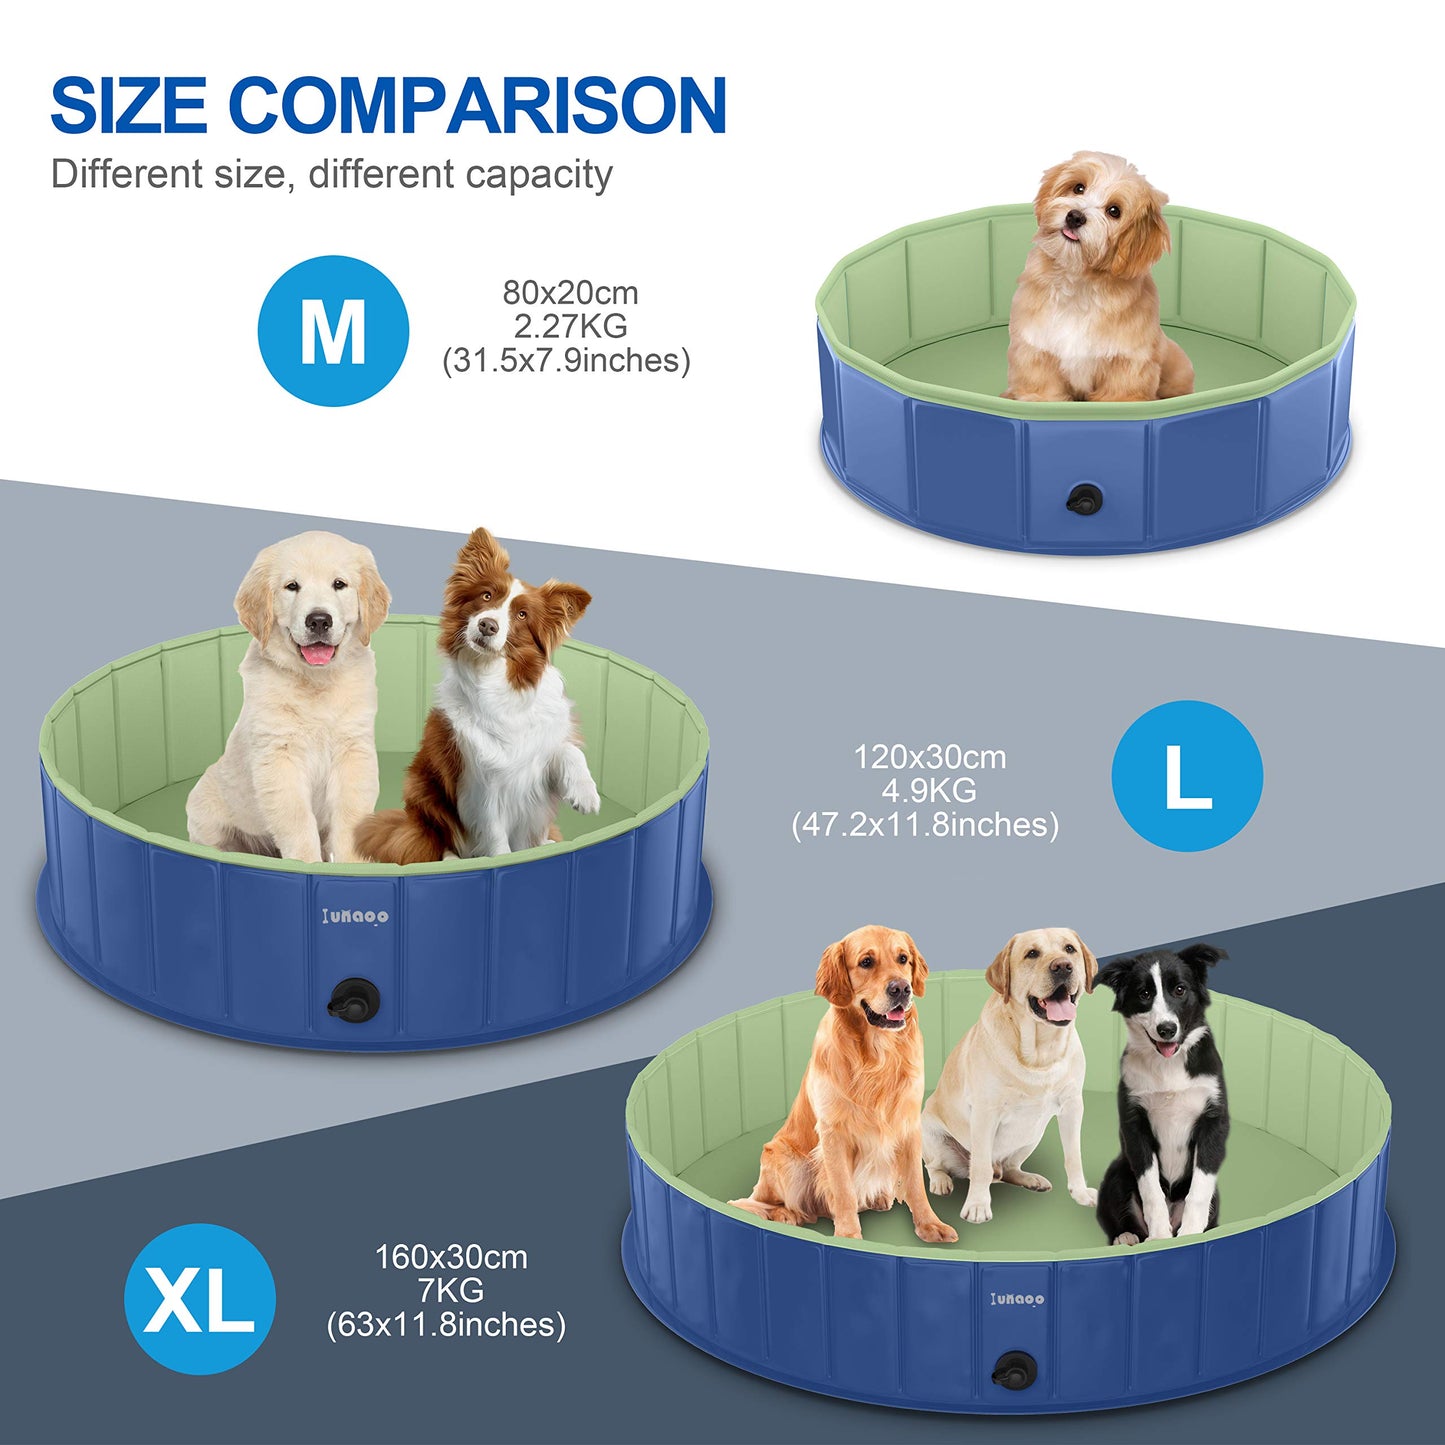 Foldable Dog Pool by LUNAOO- Portable Kiddie Pool, Durable PVC Outdoor Swimming Pool for Large Small Dogs (L - 47'' x 12'', Navy Blue Green) L - 47'' x 12''